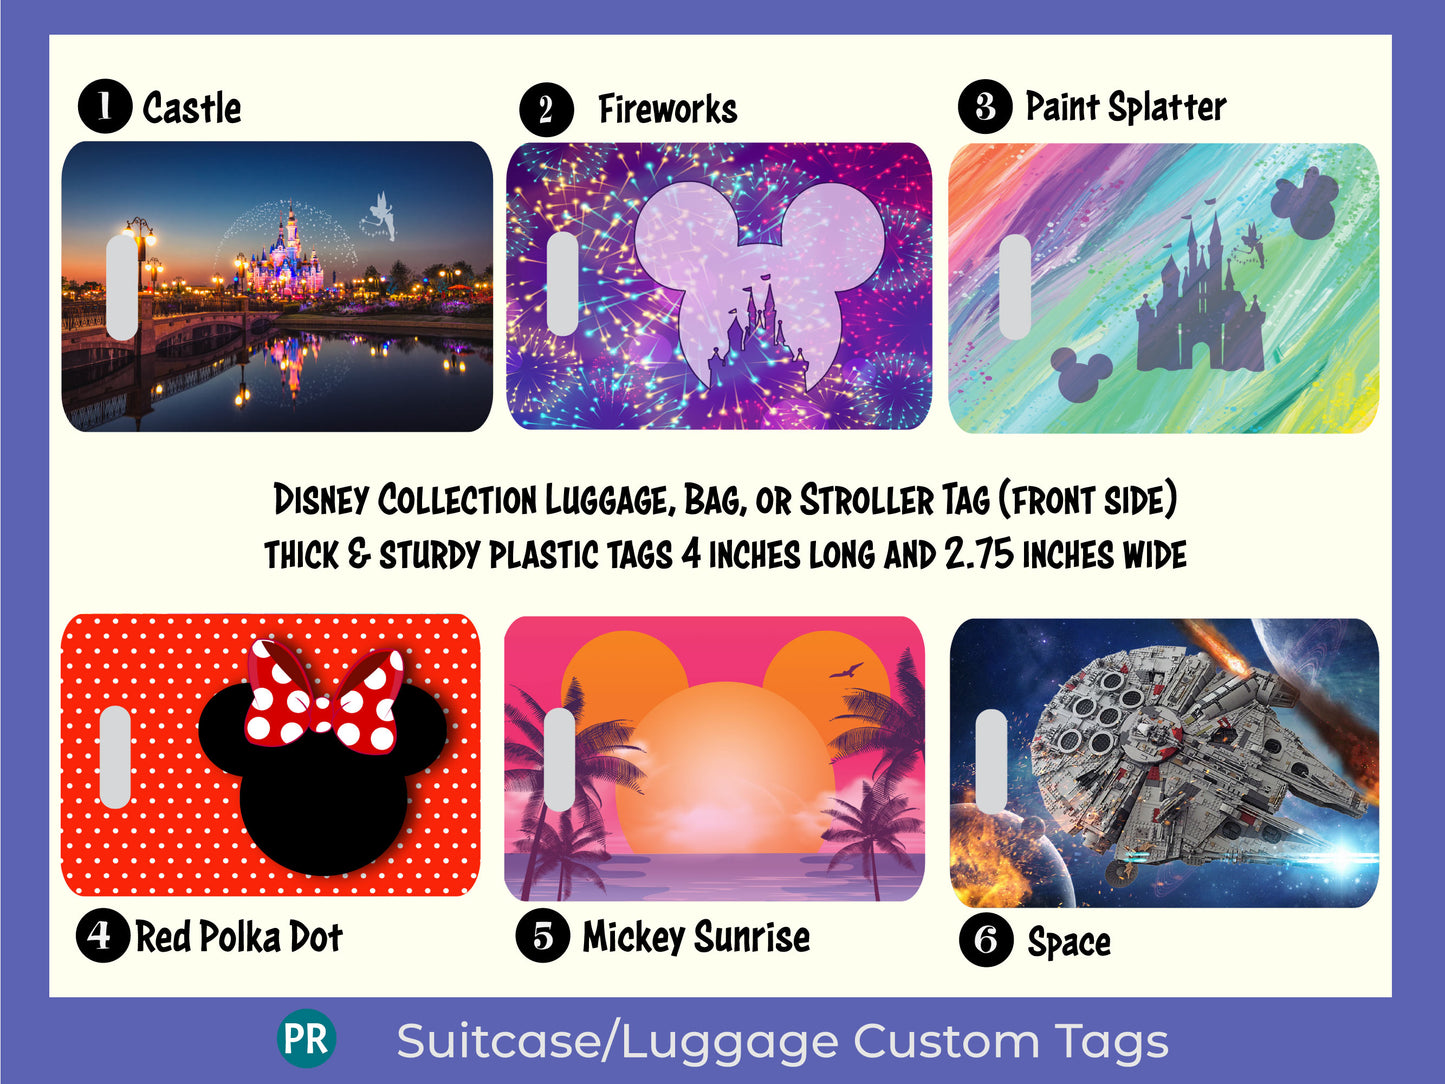 Personalized luggage tag with a Disney Park theme. Choices are Disney Castle, Fireworks, Paint Splatter, Minnie Red Polka Dots, Mickey Sunrise, and Space Star Wars. The back of the luggage tag has your information Name, address and phone number. Great gift for all!